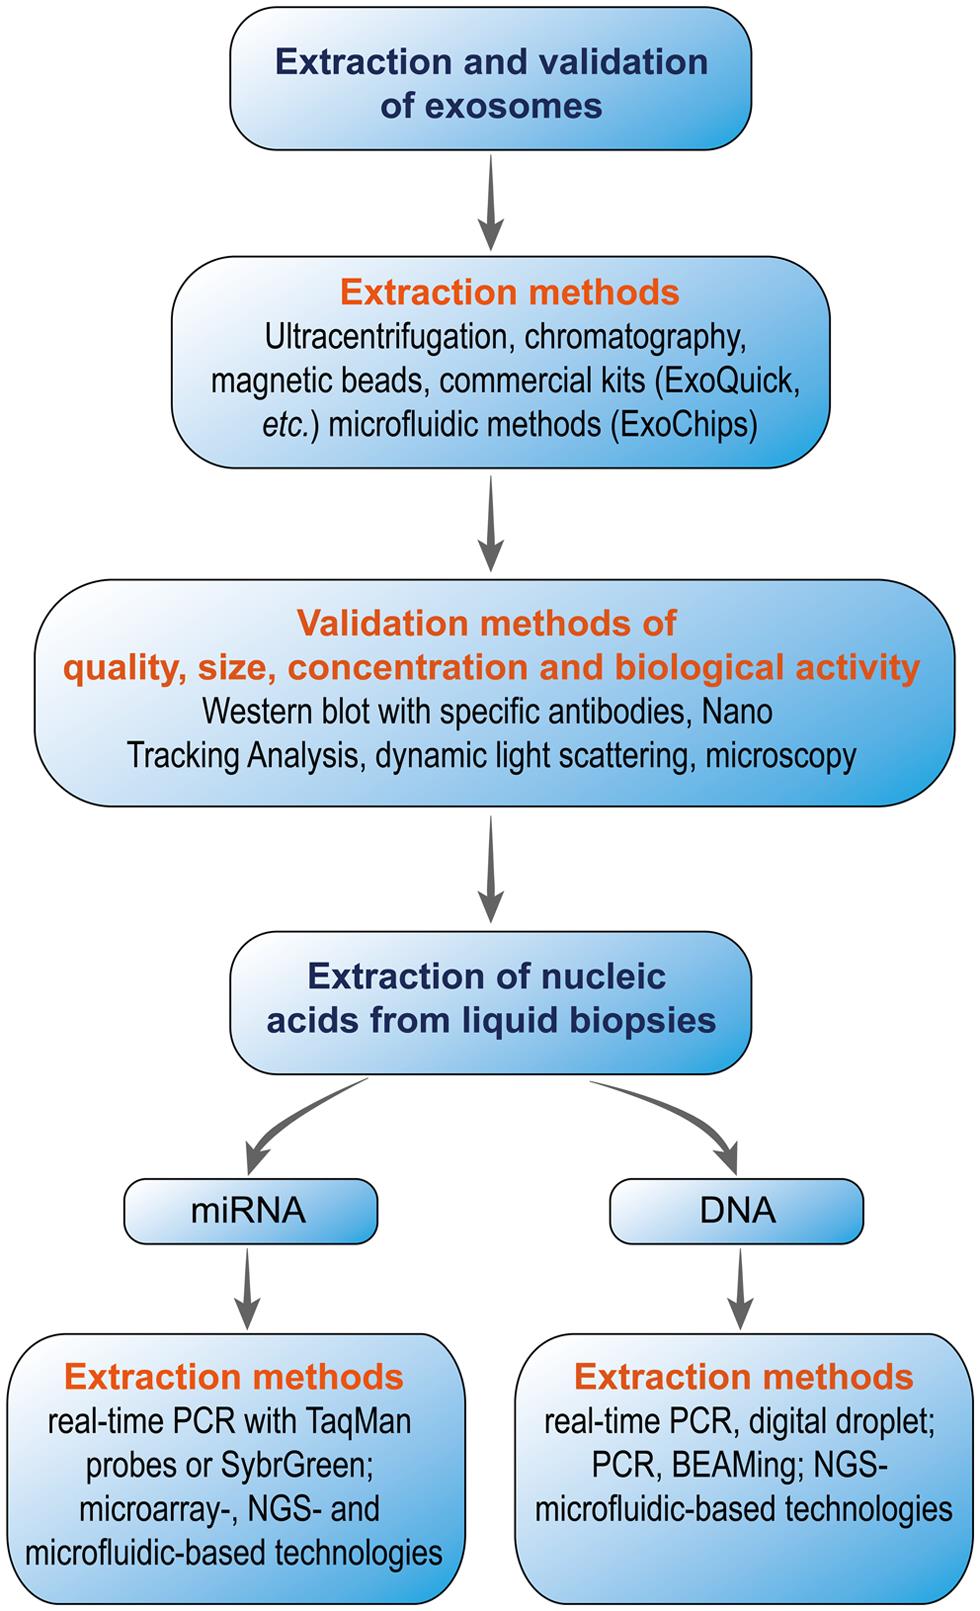 Summary of the exosome- and nucleic acid-based technologies.